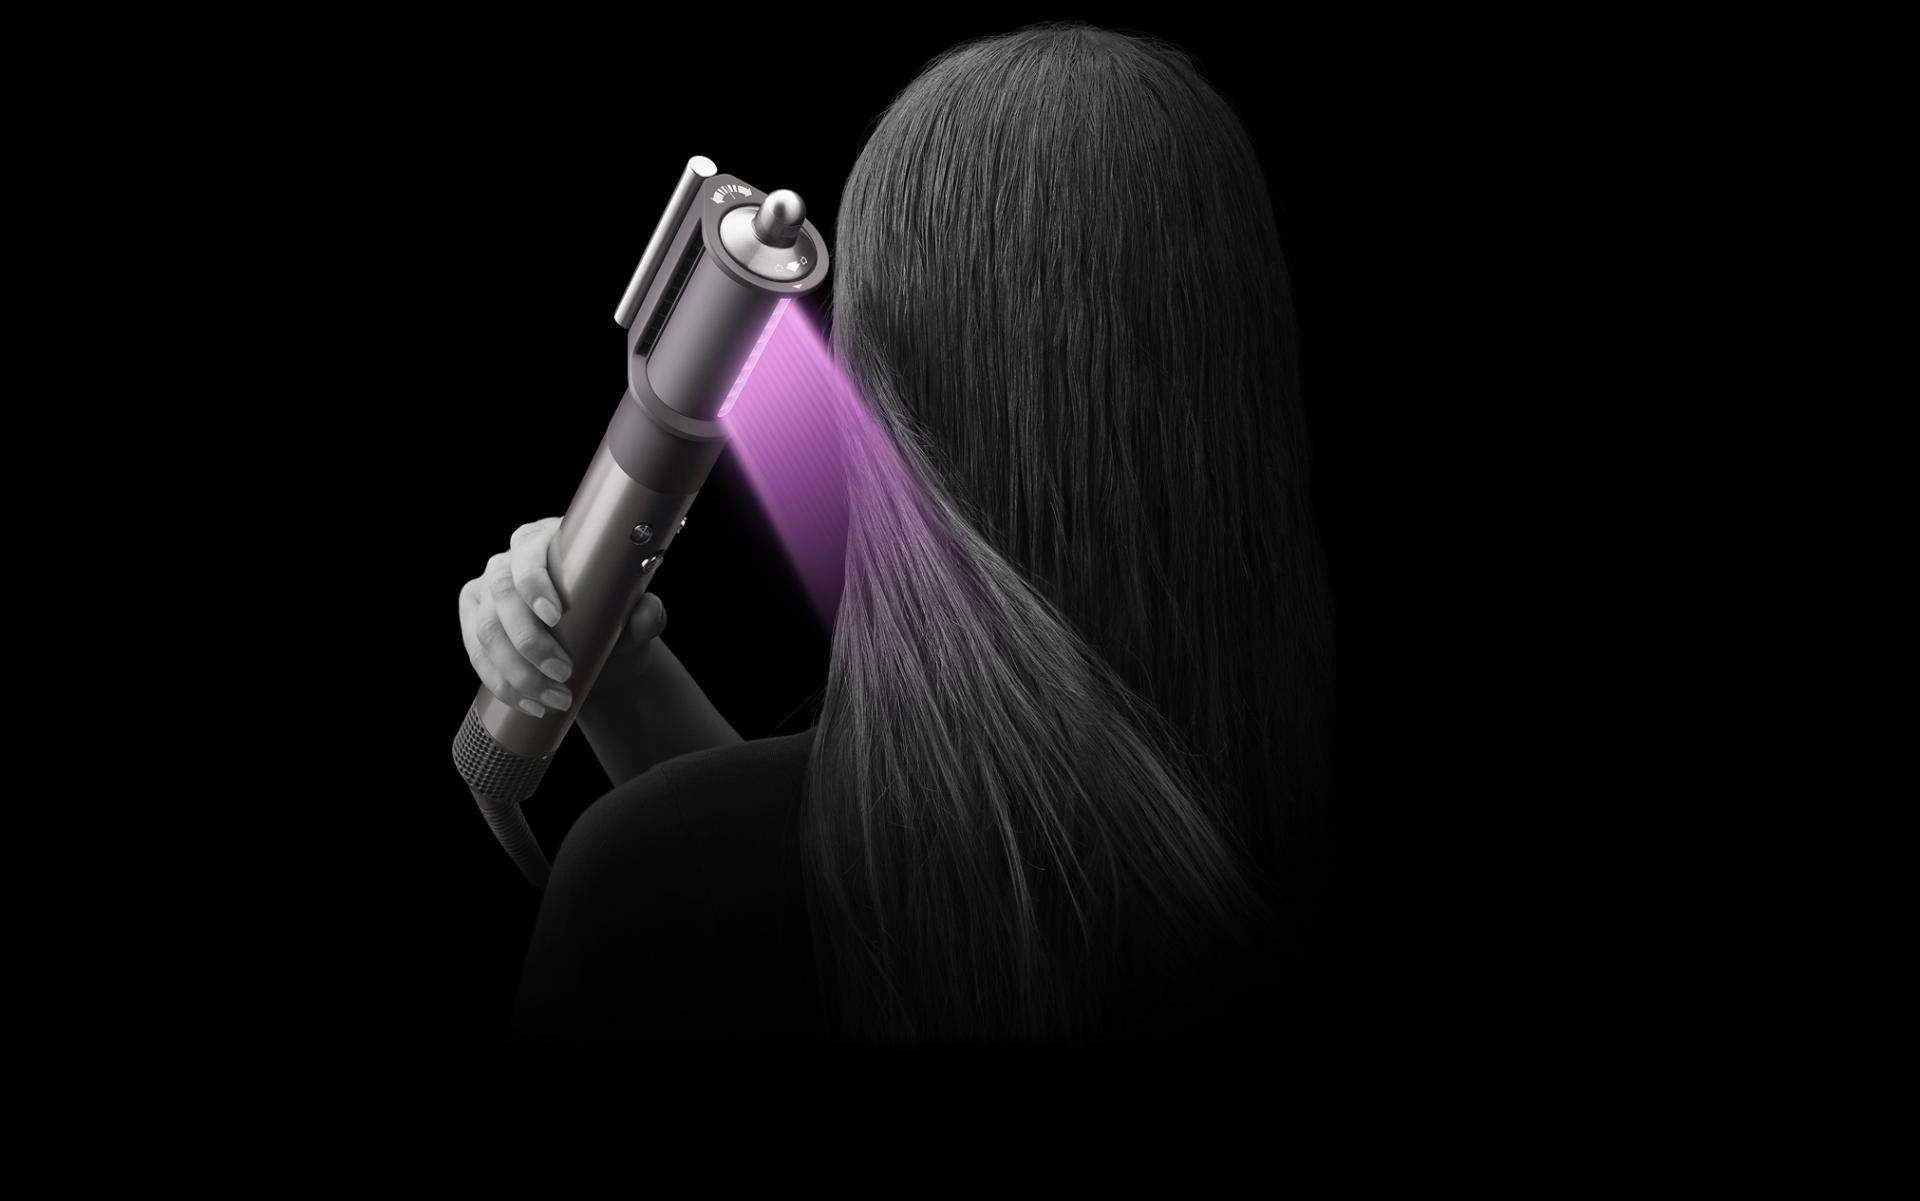 Model using Coanda smoothing dryer attachment in Drying mode.